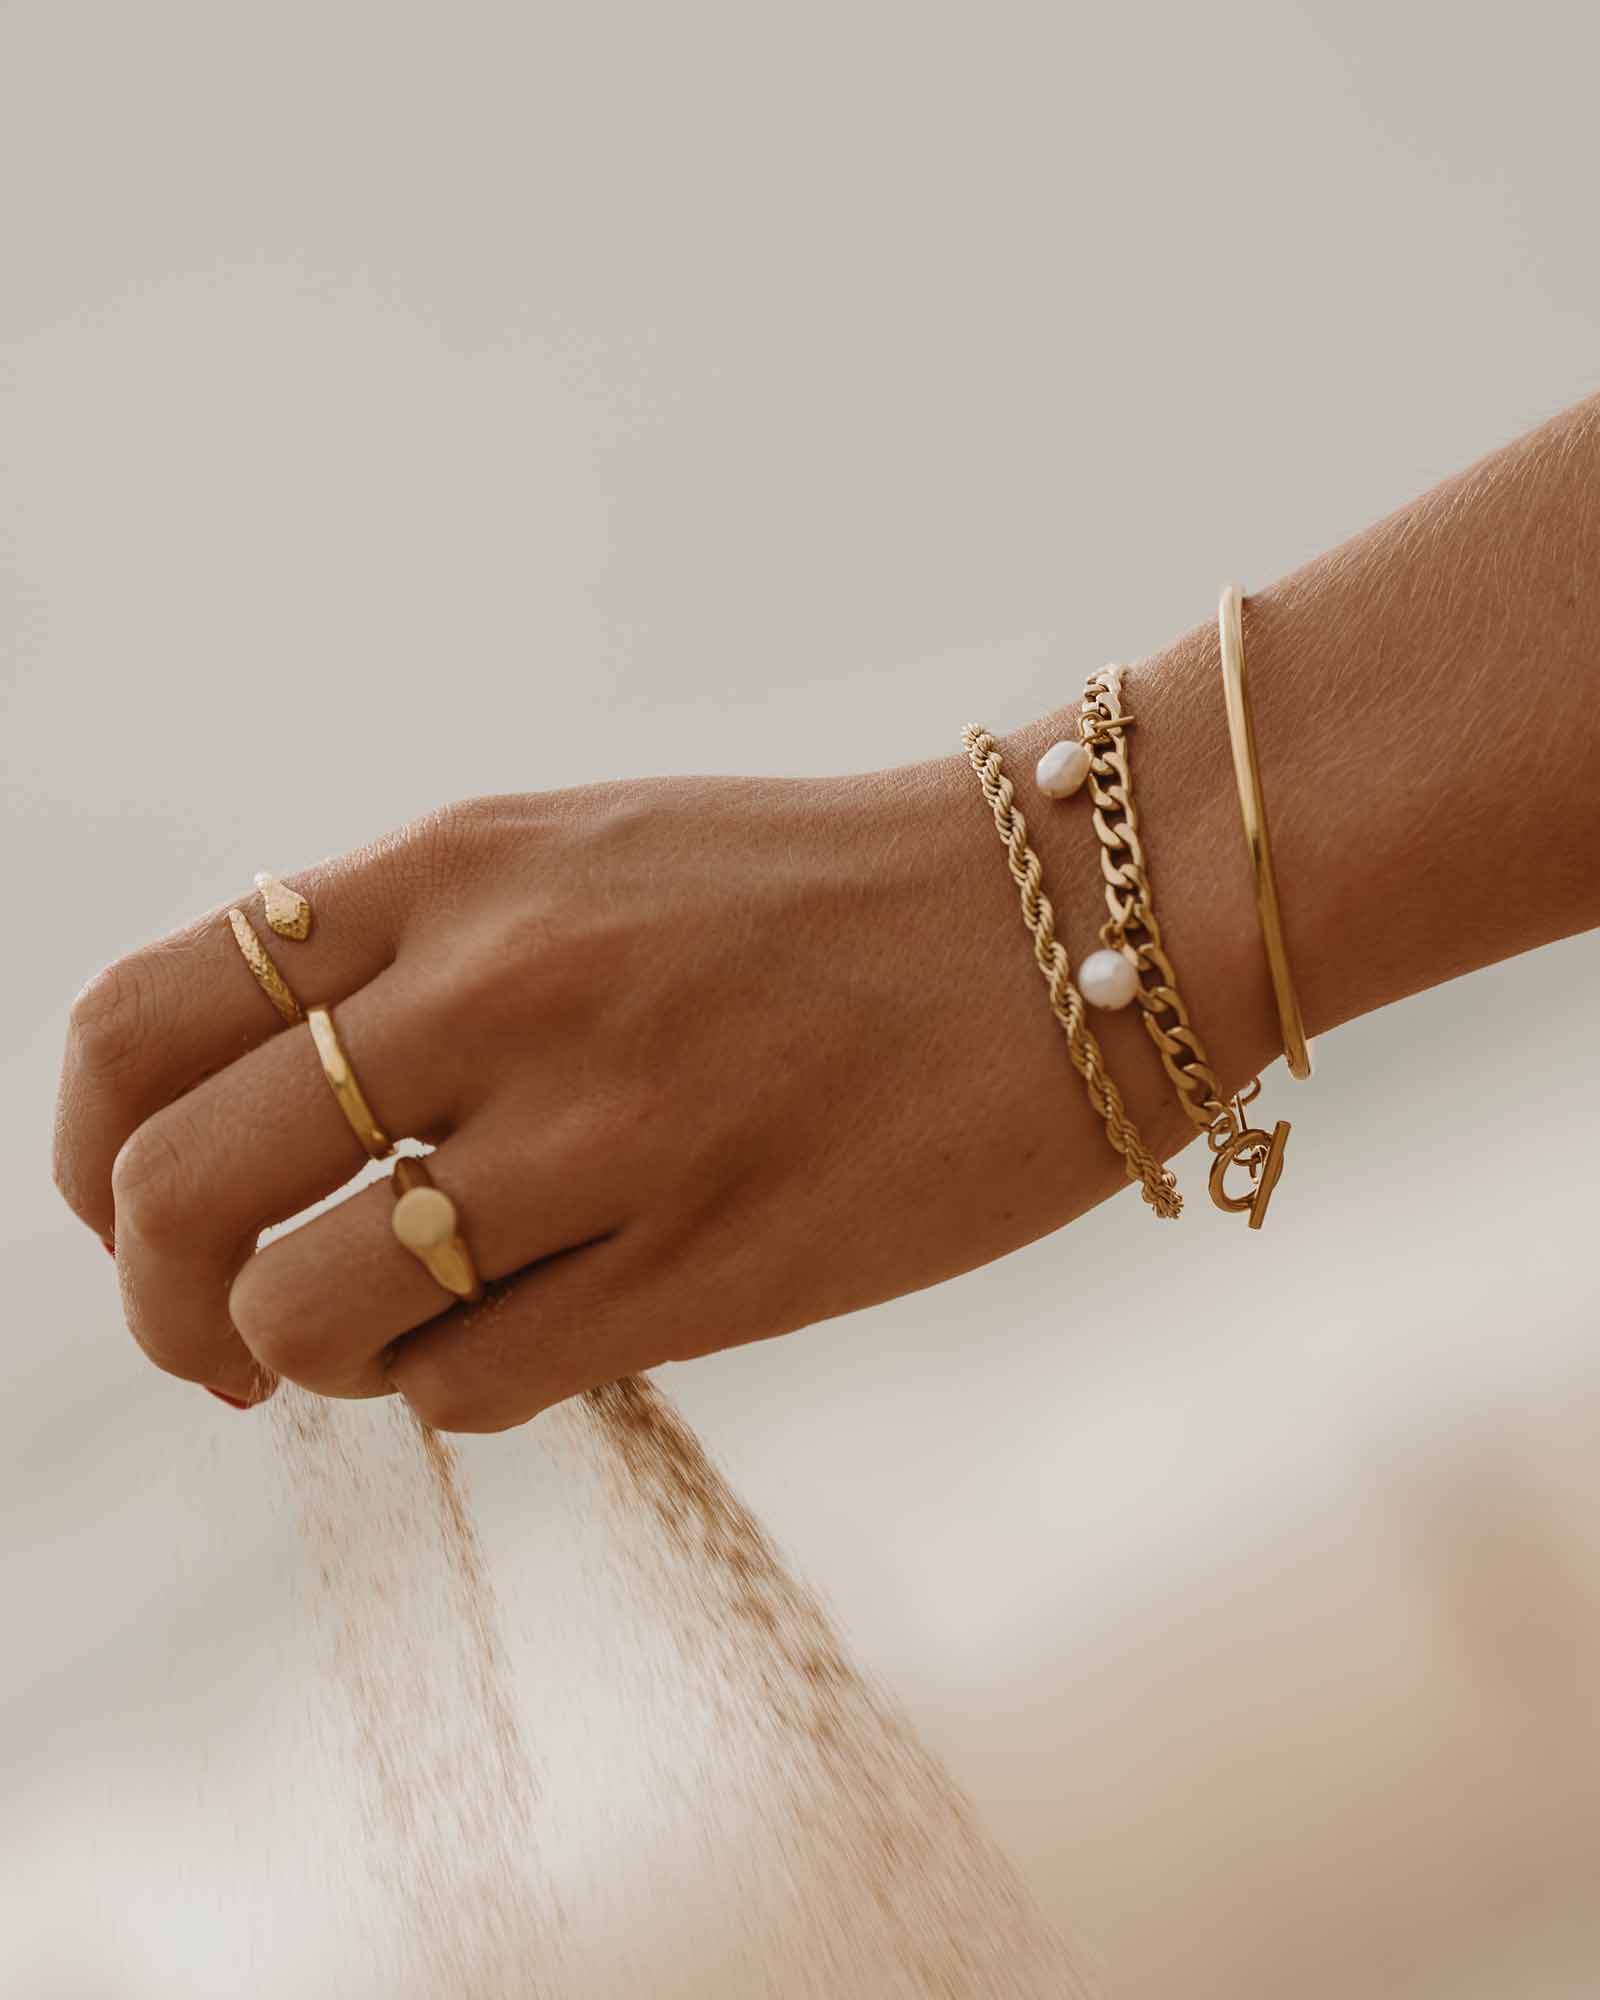 20PCS, Gold Color Copper Beads Rope Thread String Braided Bracelets Women  Men Jewelry Gifts